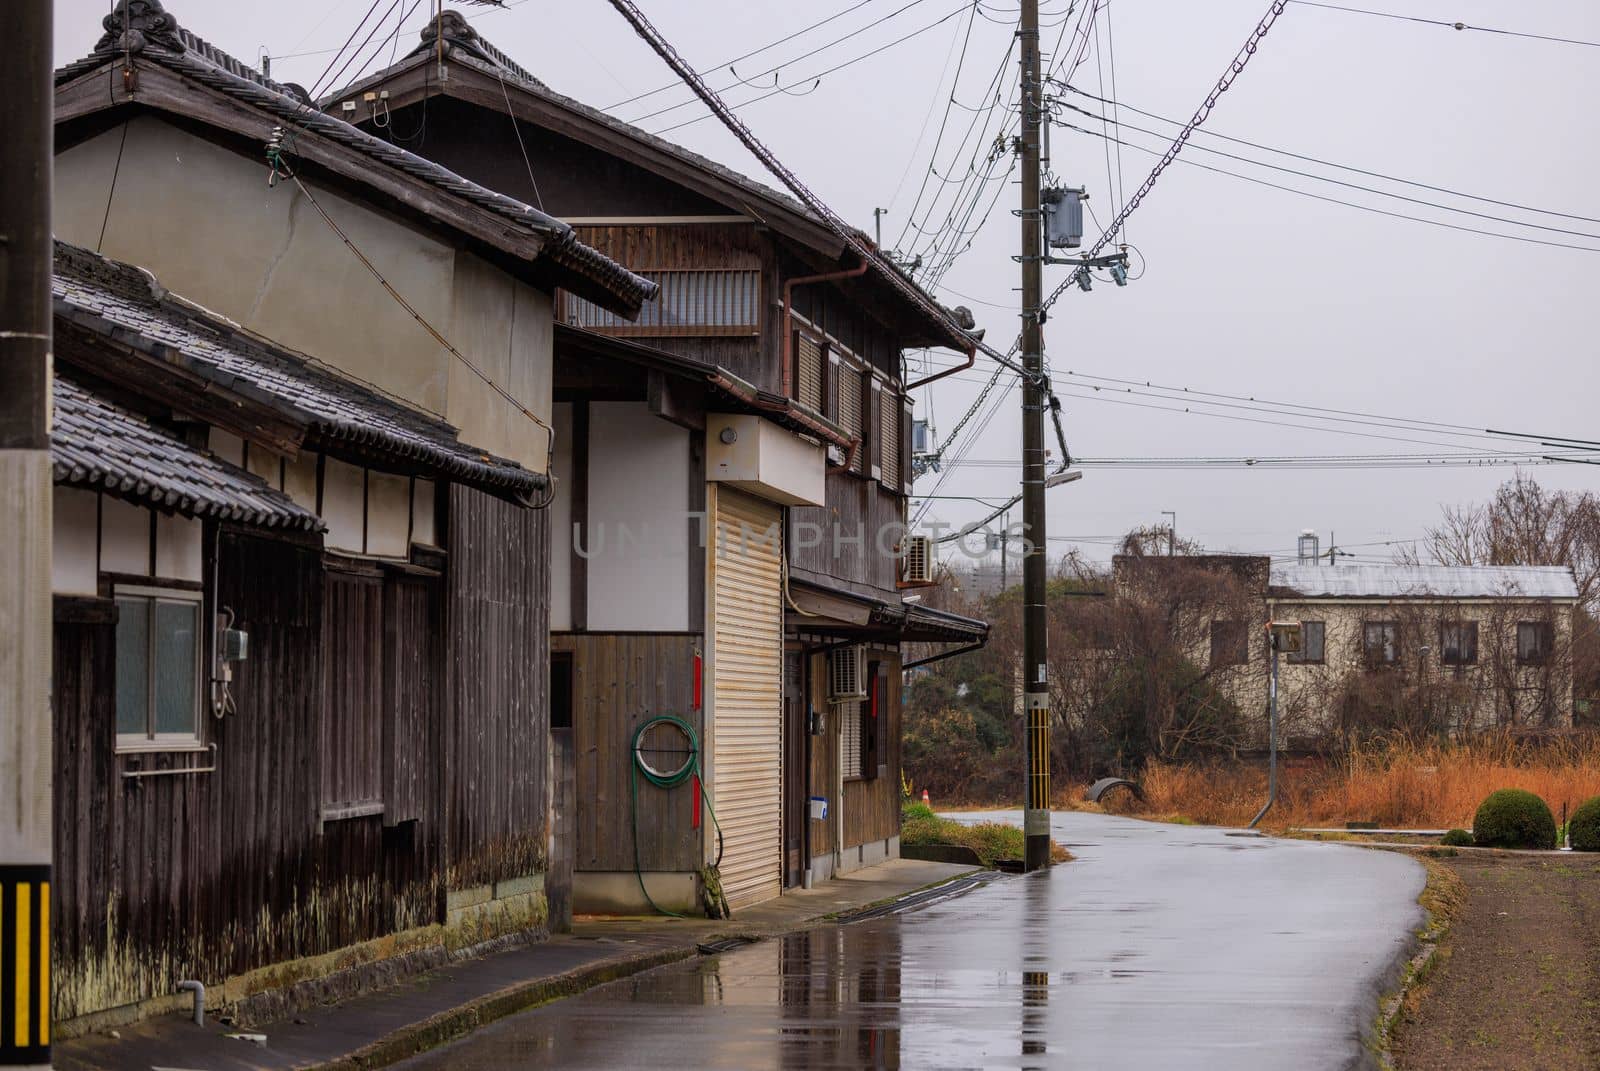 Old wooden Japanese house in rural village on a rainy day by Osaze